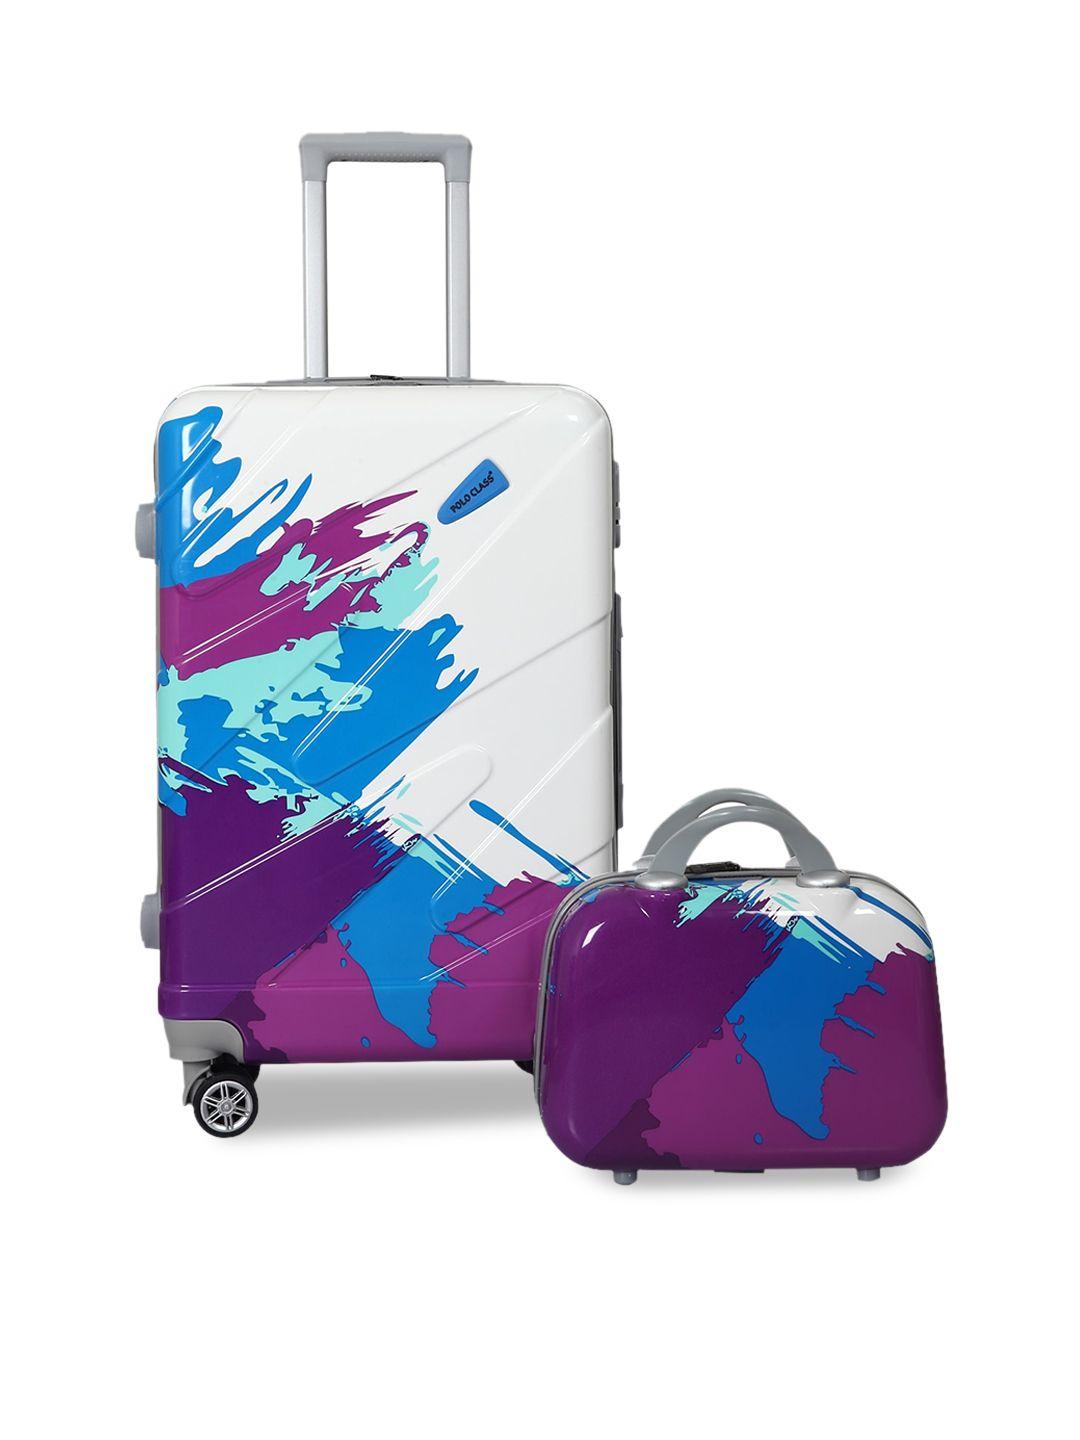 polo class white & purple trolley bag with 1pc vanity bag